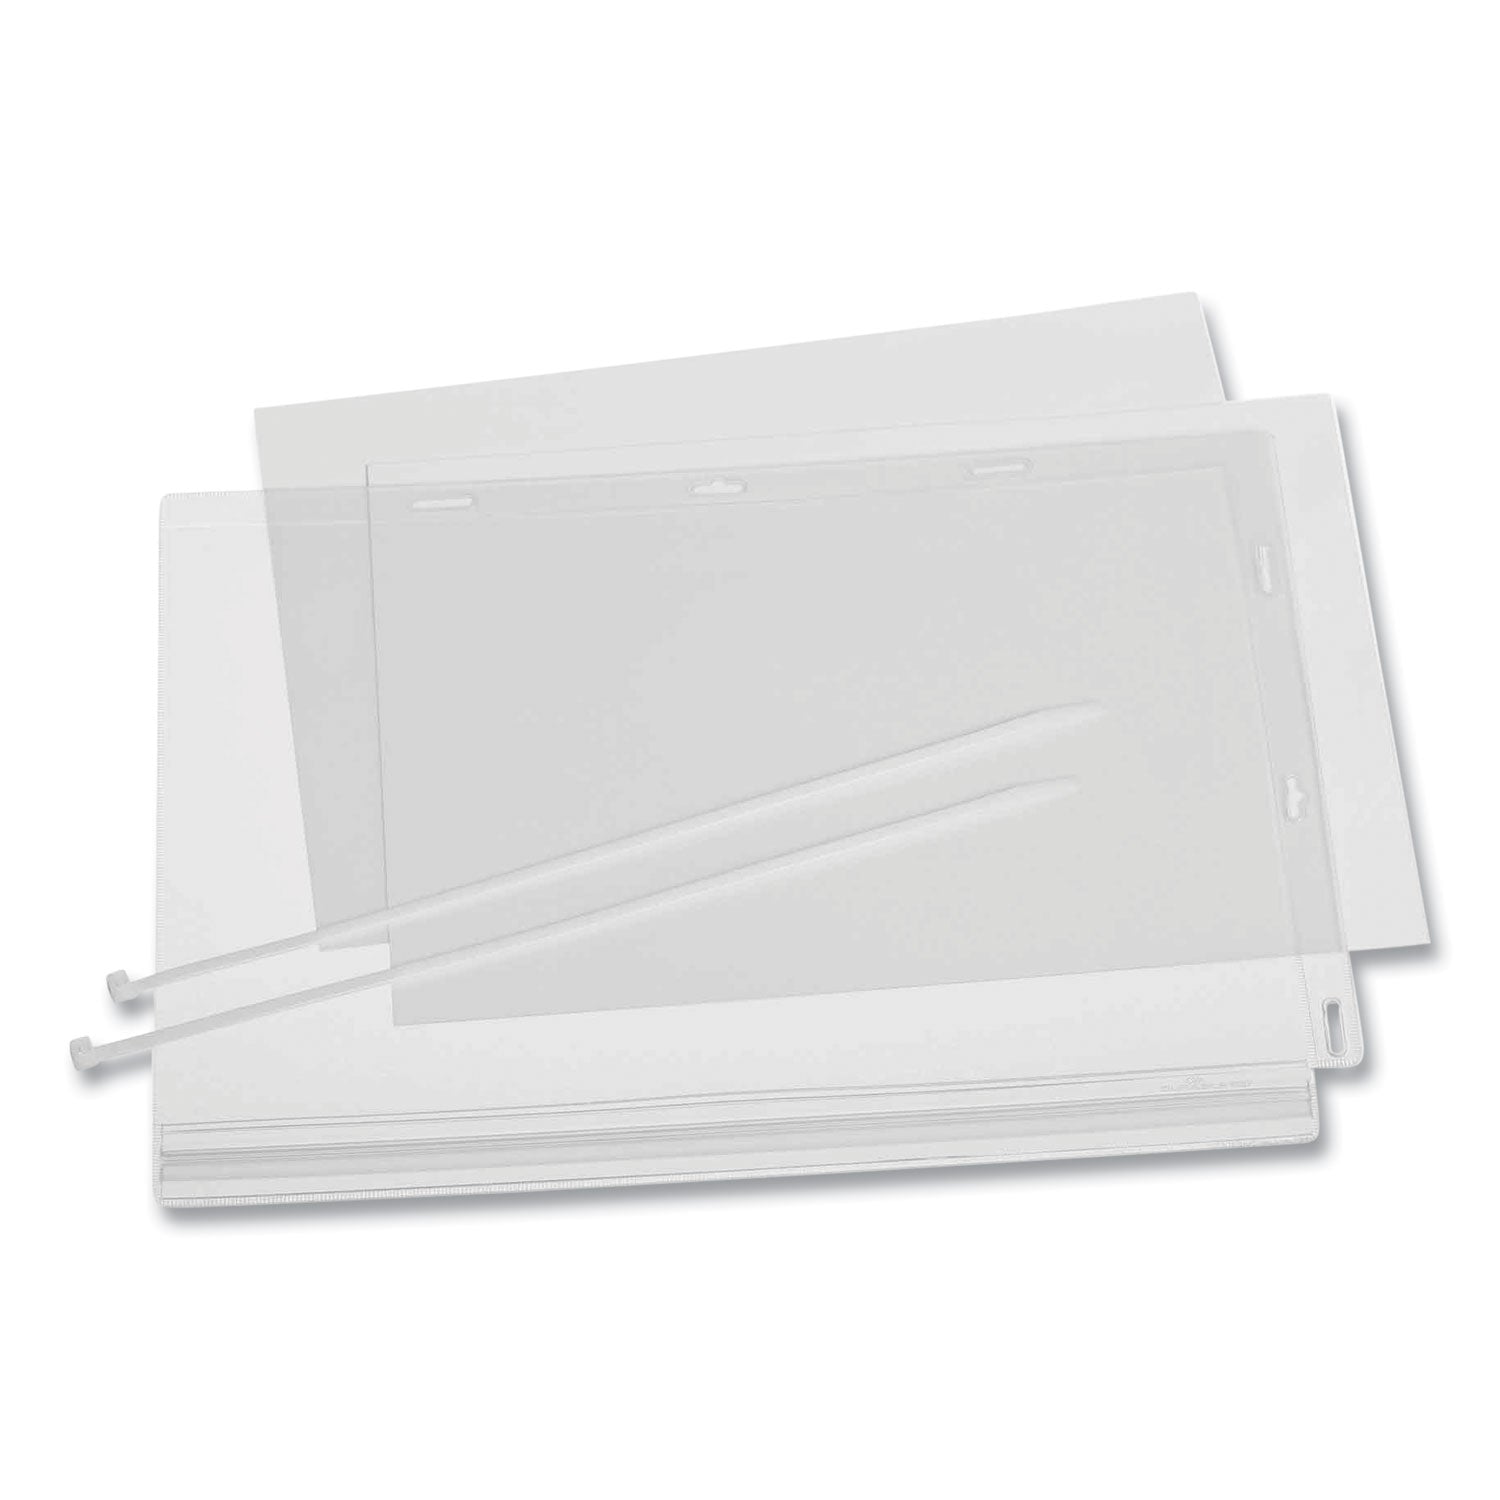 water-resistant-sign-holder-pockets-with-cable-ties-85-x-11-clear-frame-5-pack_dbl502719 - 4